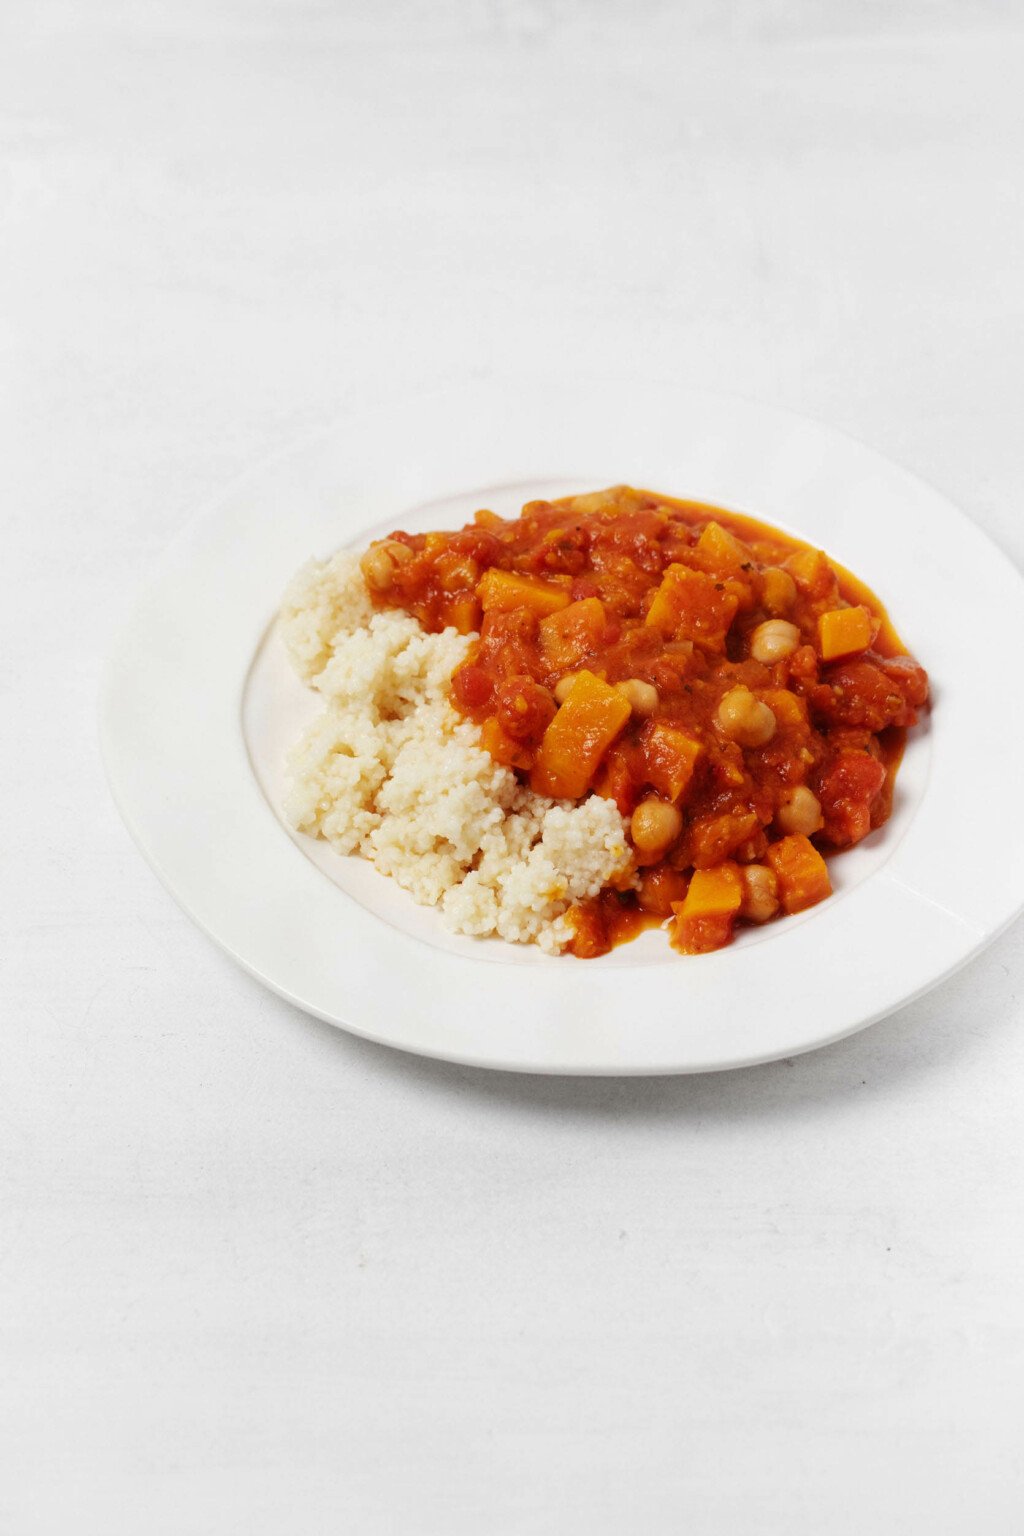 A round, rimmed white plate rests on a white surface. On the plate is couscous and a Moroccan-inspired, butternut chickpea stew.